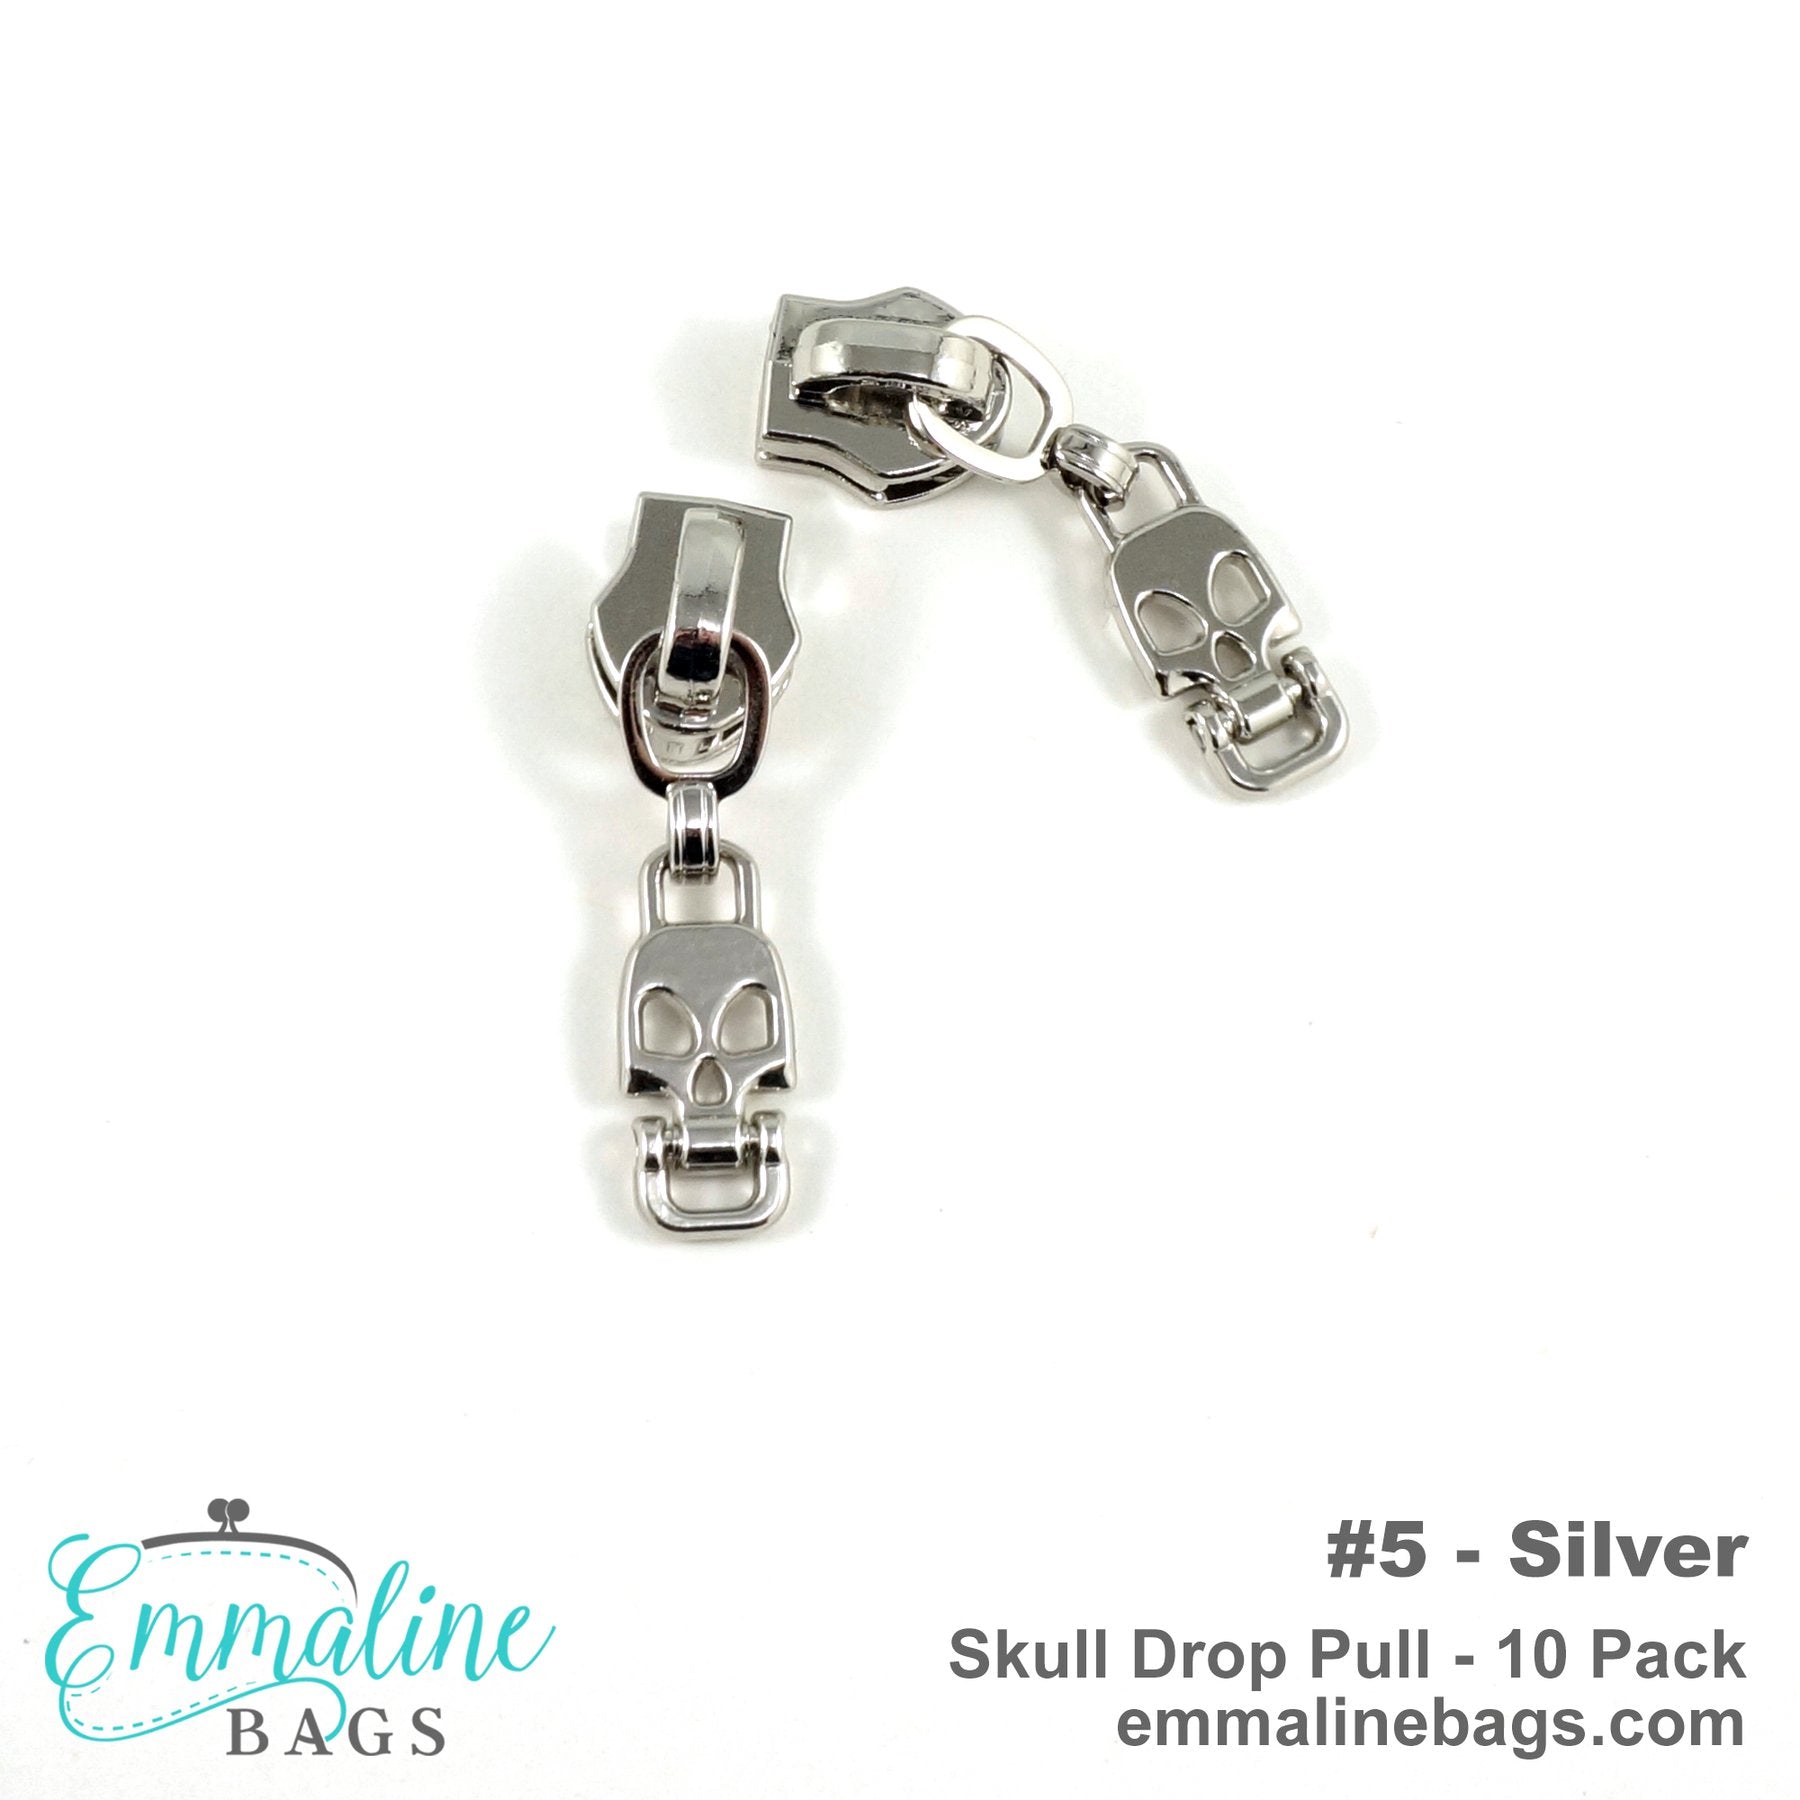 Zipper Sliders with Pulls - Size #5 - Skull Drop Pull/ Silver